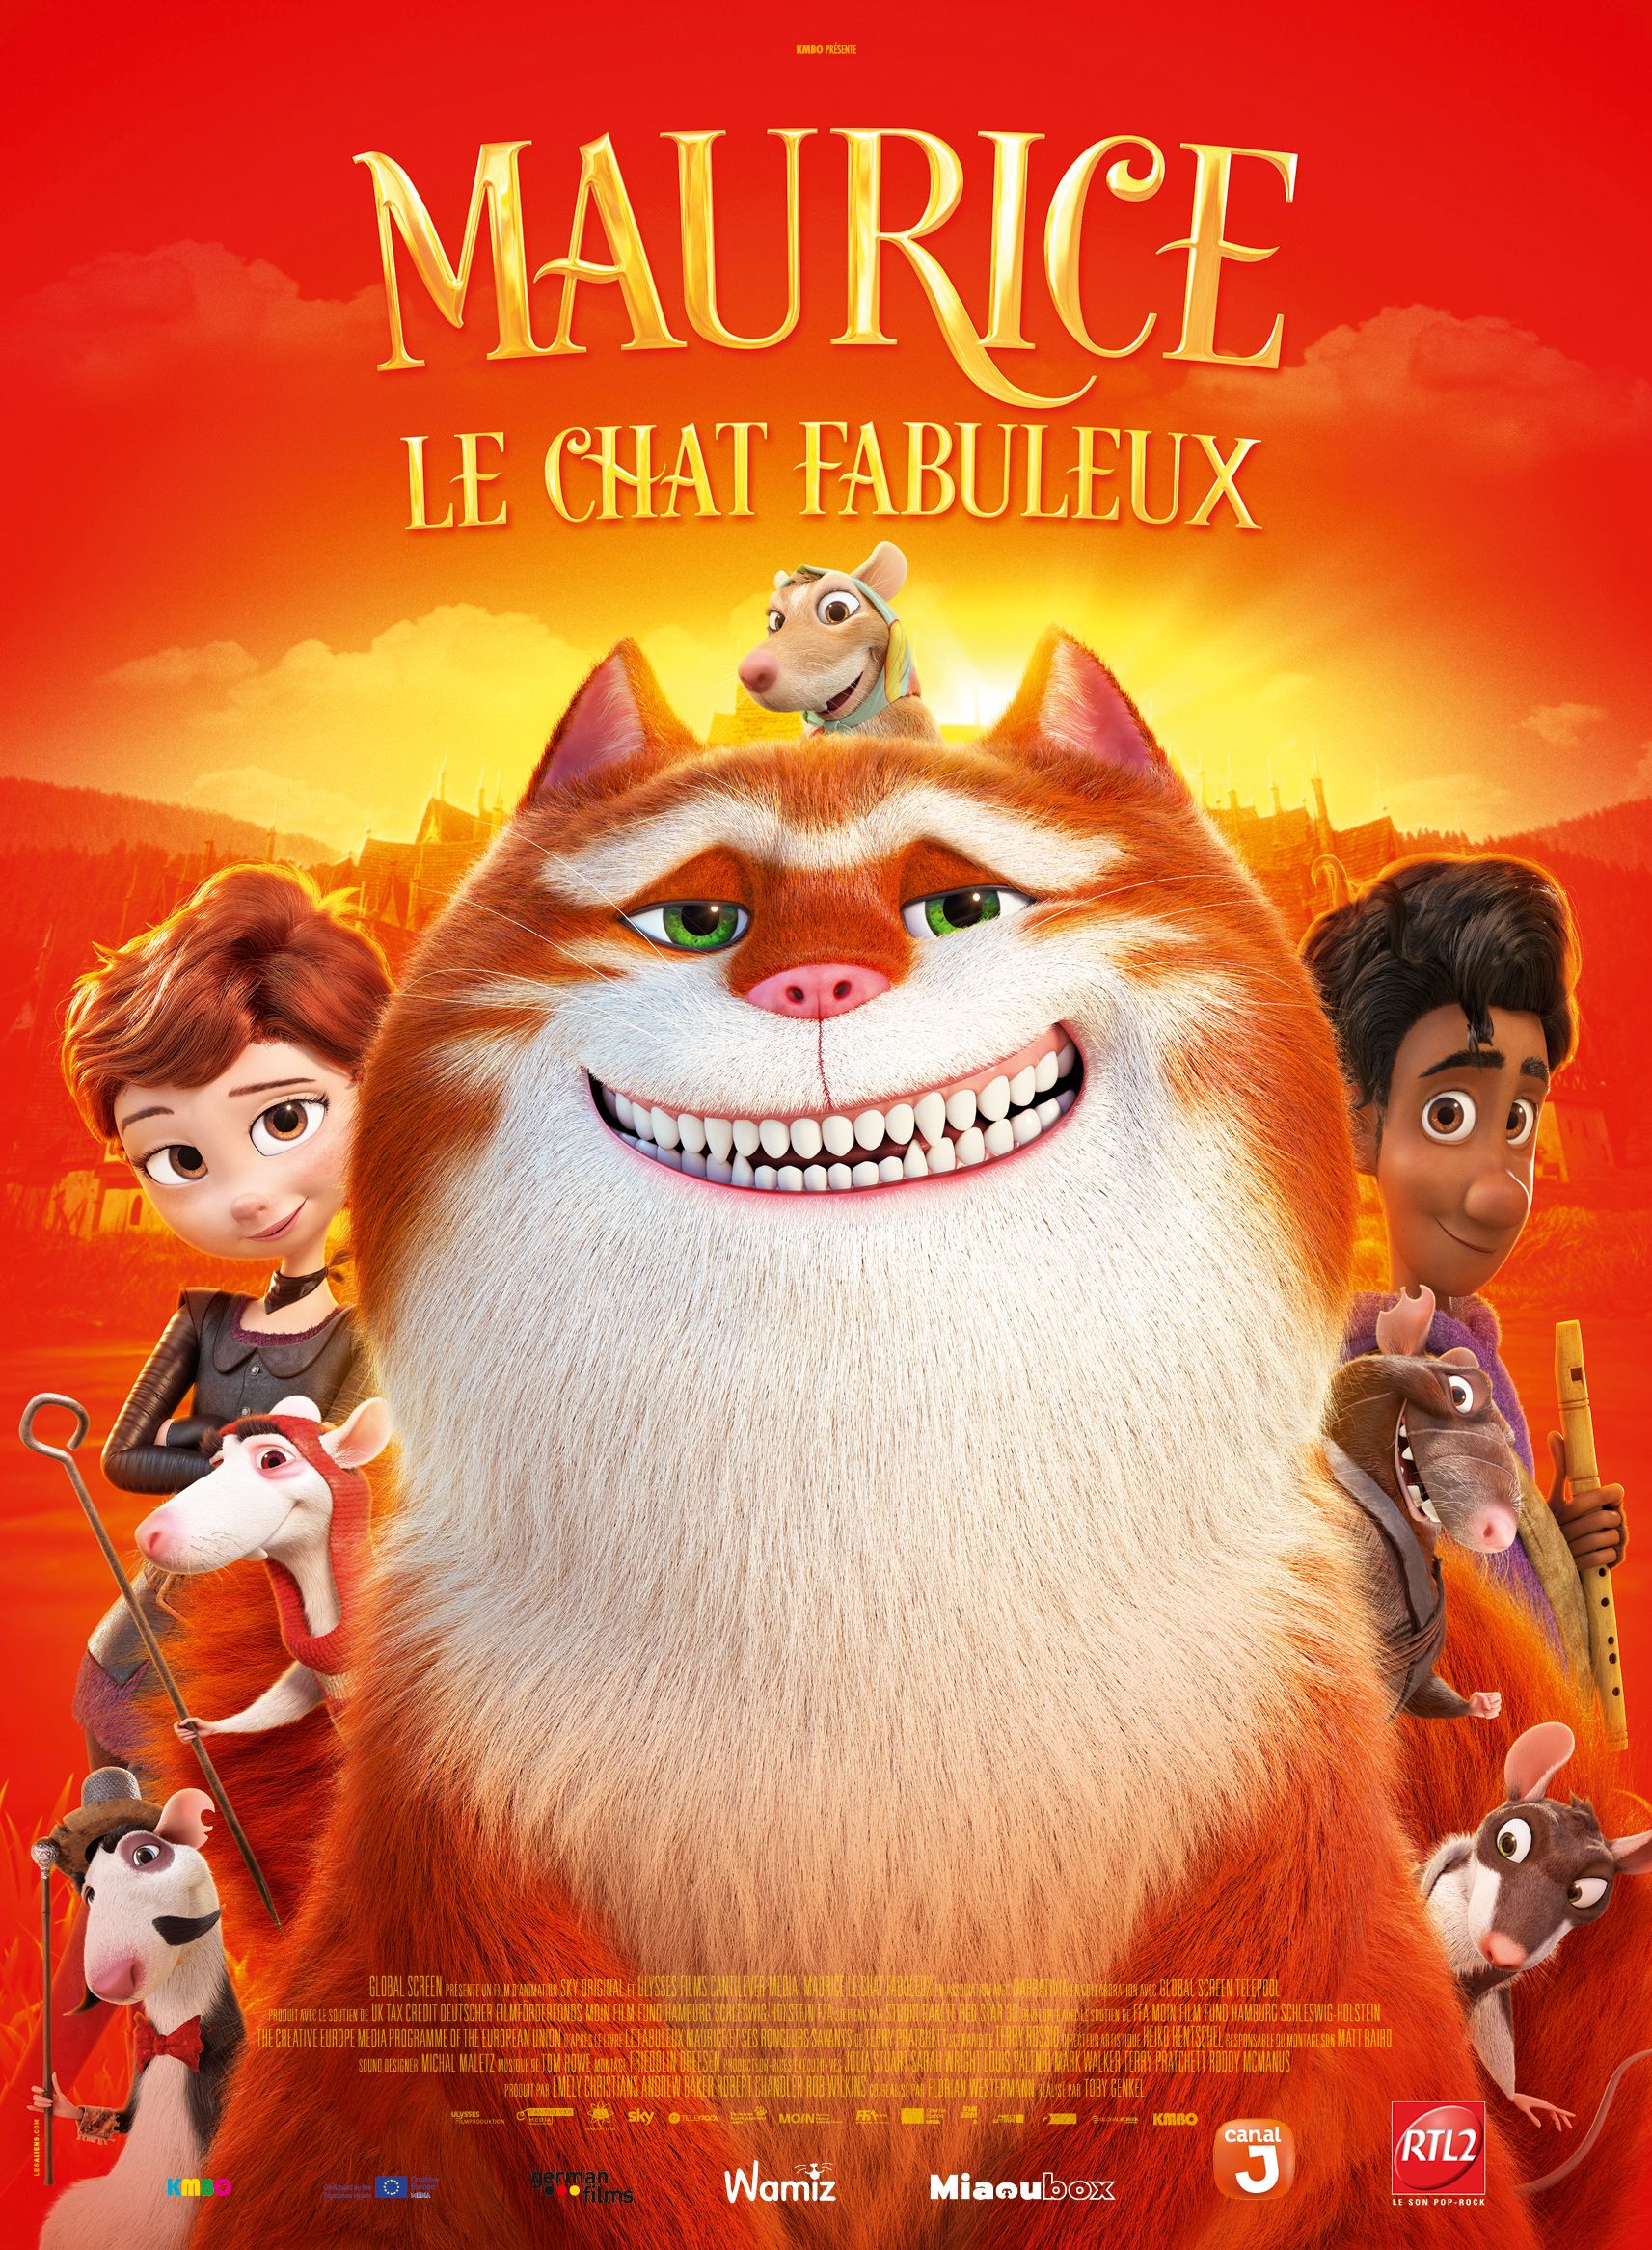 Maurice Le chat fabuleux